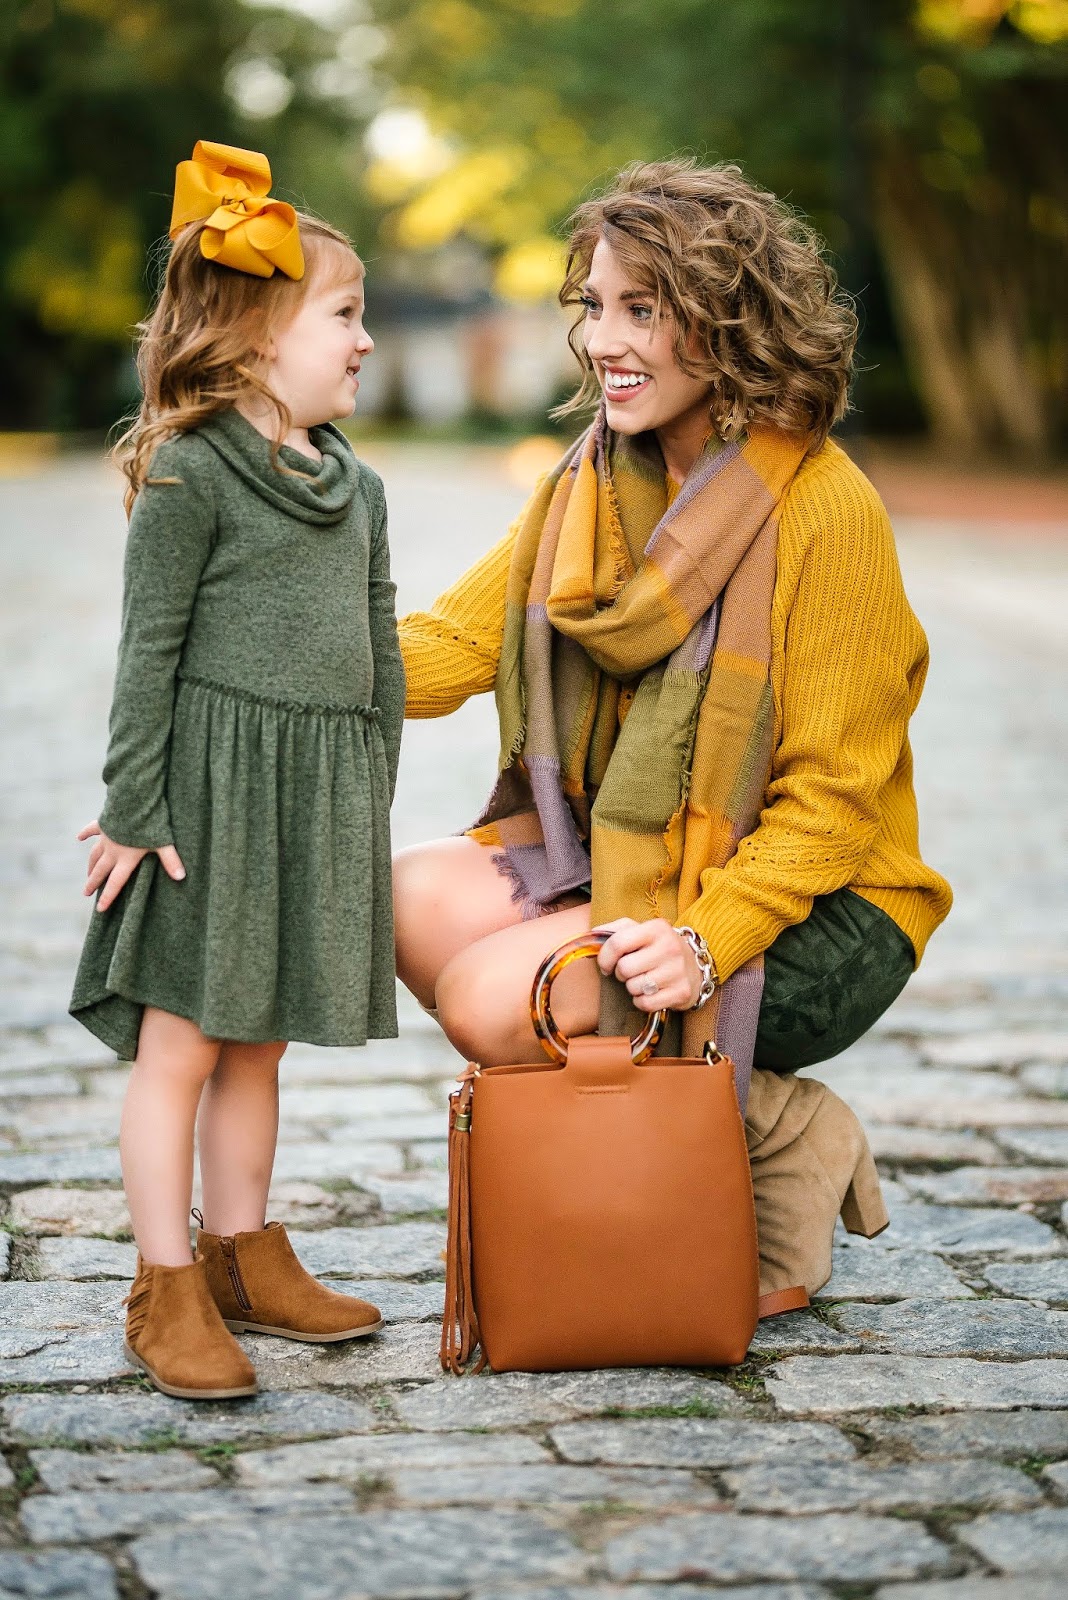 Mommy & Me in Mustard Yellow & Olive Green for Fall - Something Delightful Blog